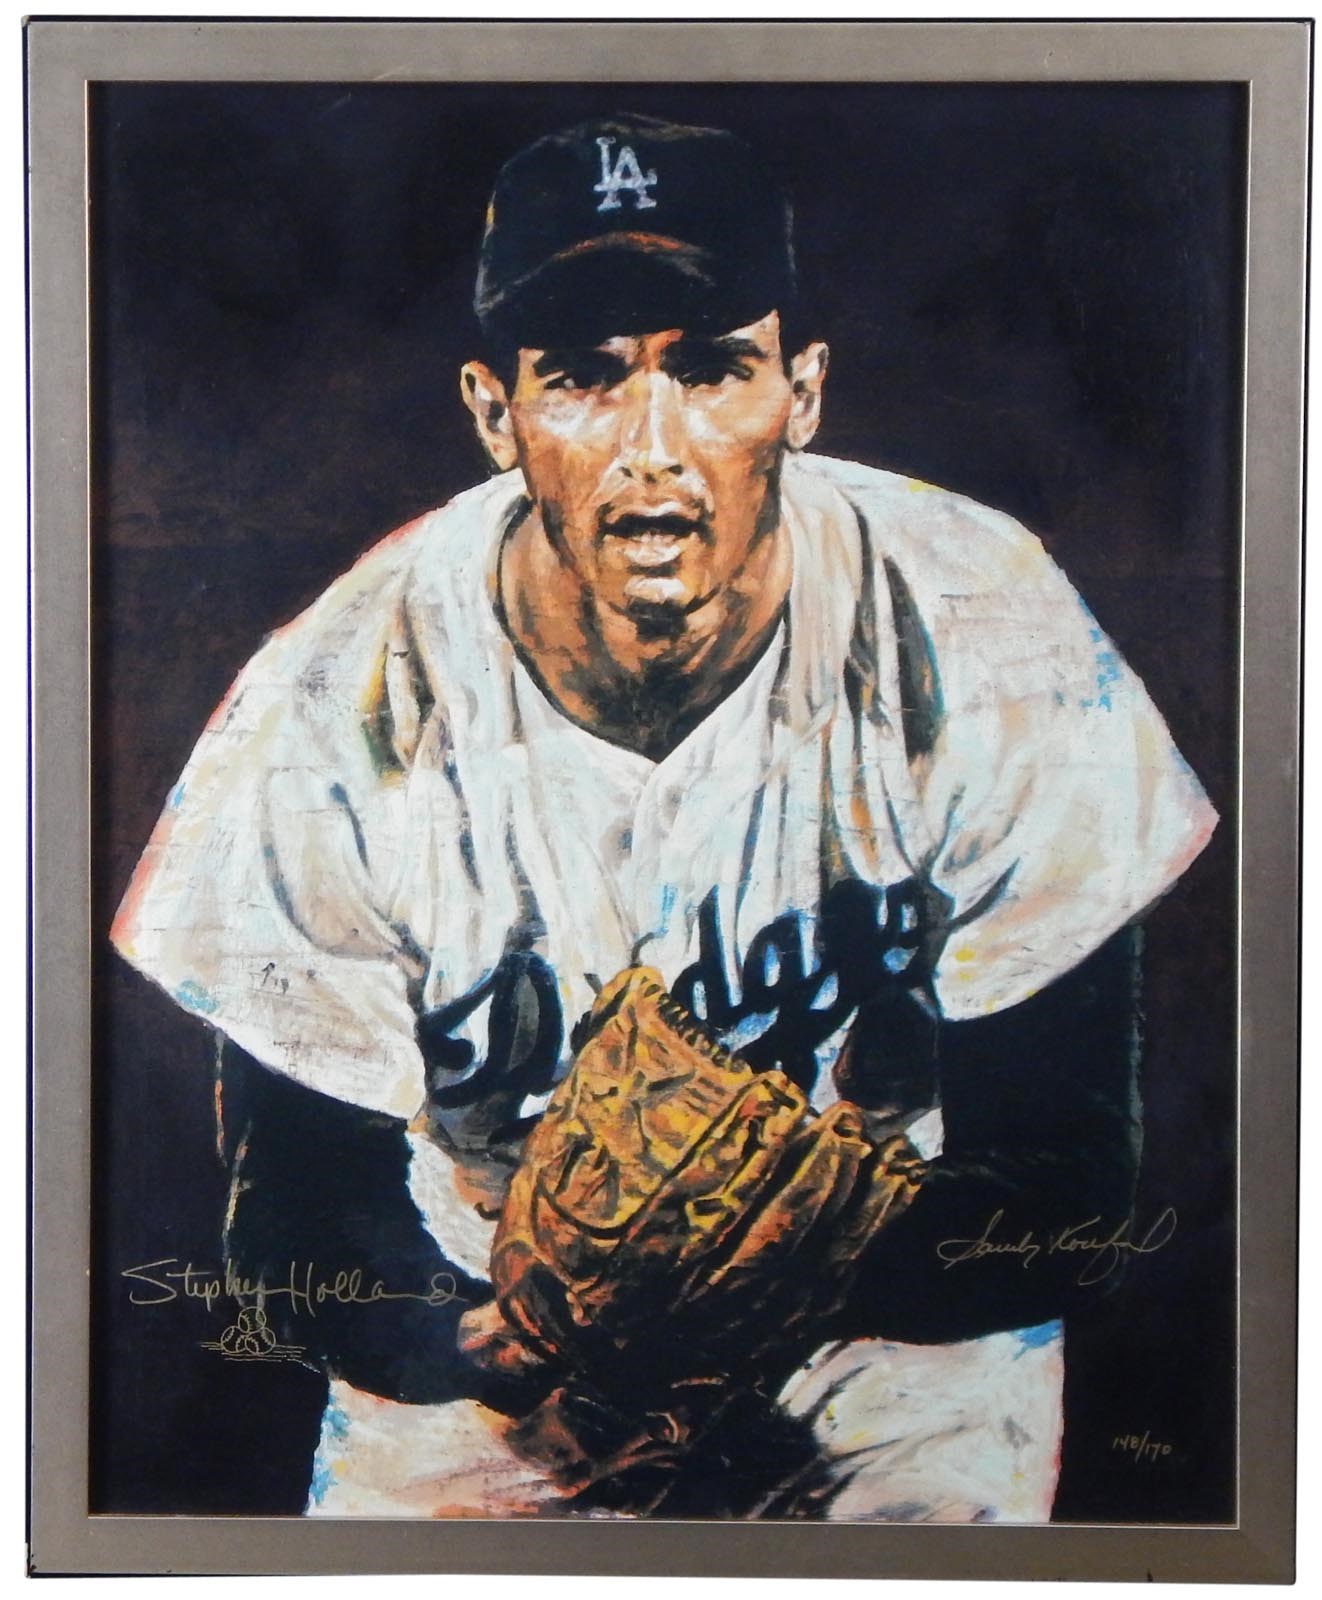 Artists - Koufax "Looking In" Holland Giclee From Sandy Koufax's Personal Collection